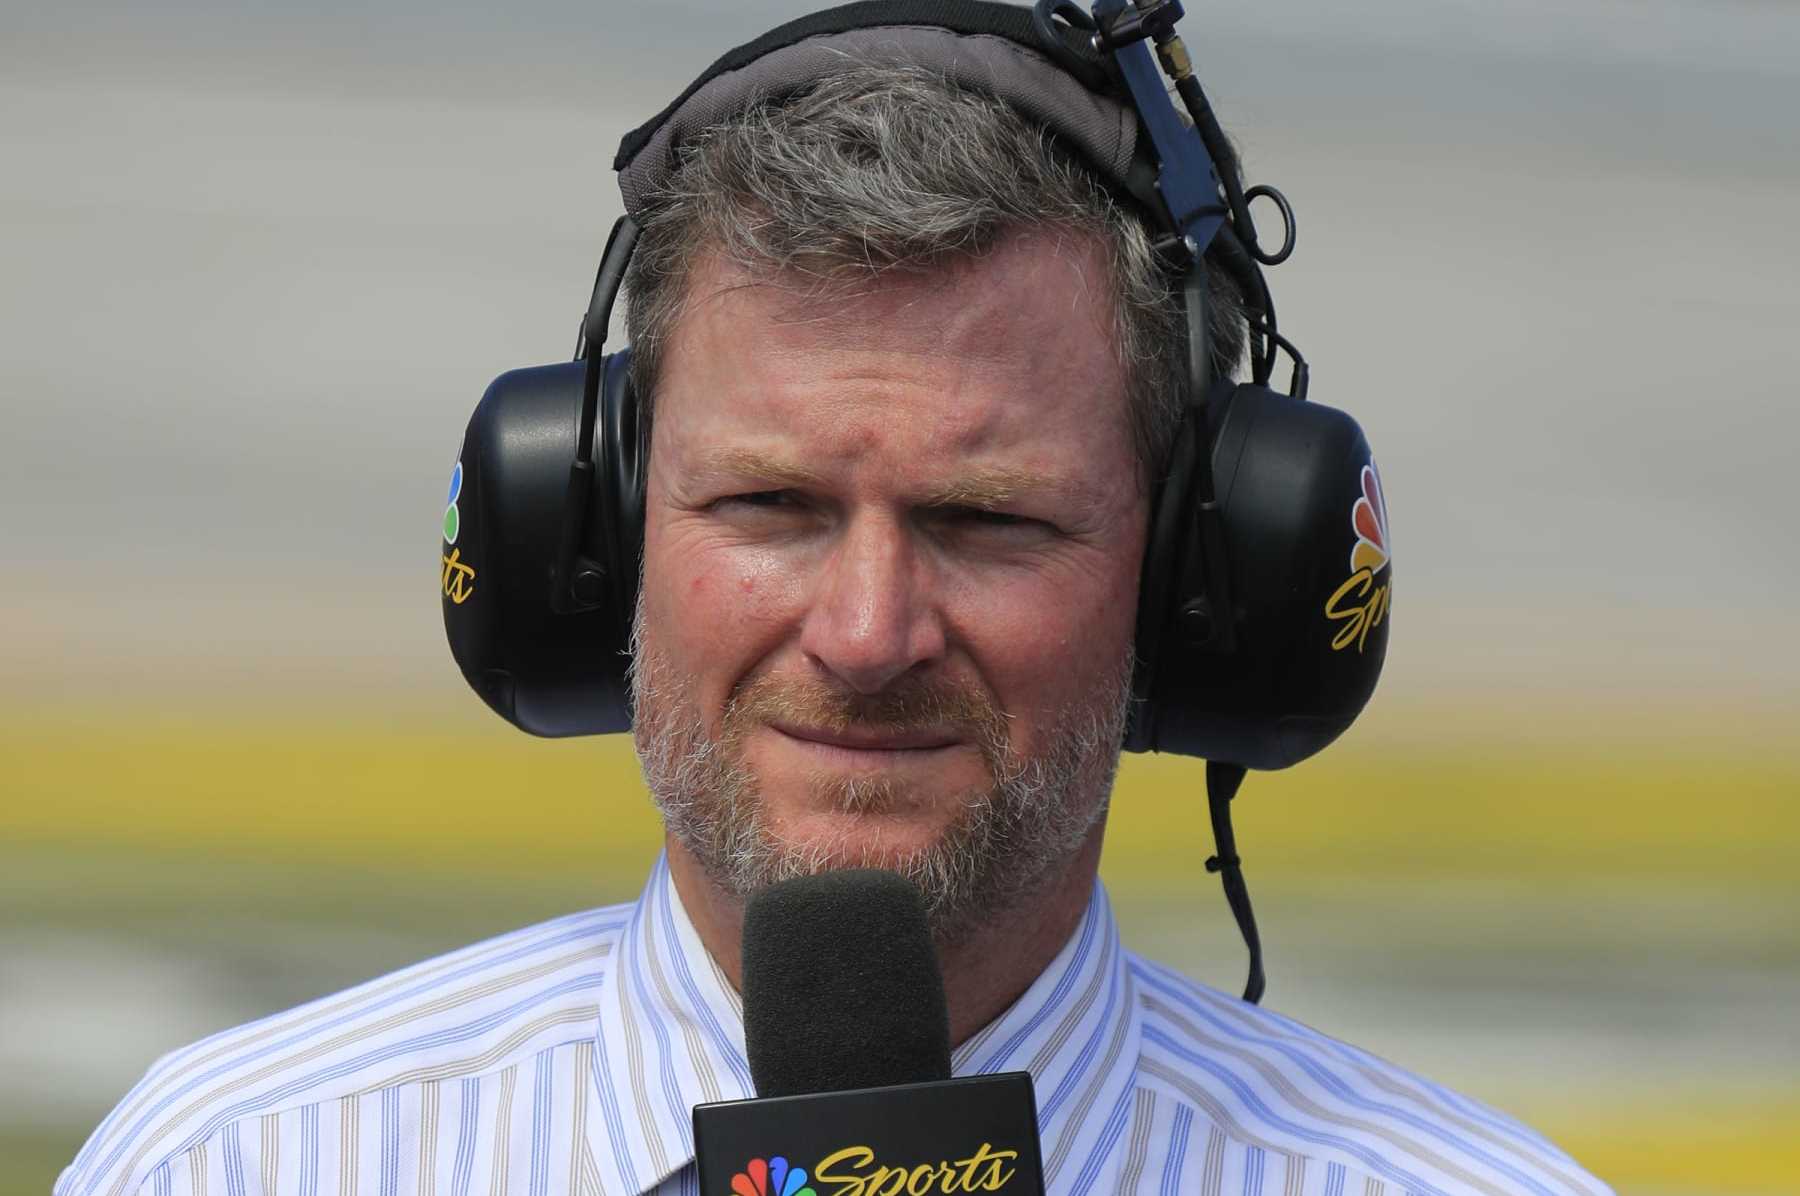 Dale Earnhardt Jr. Announces Exciting New Role as NASCAR Broadcaster for TNT Sports in 2025